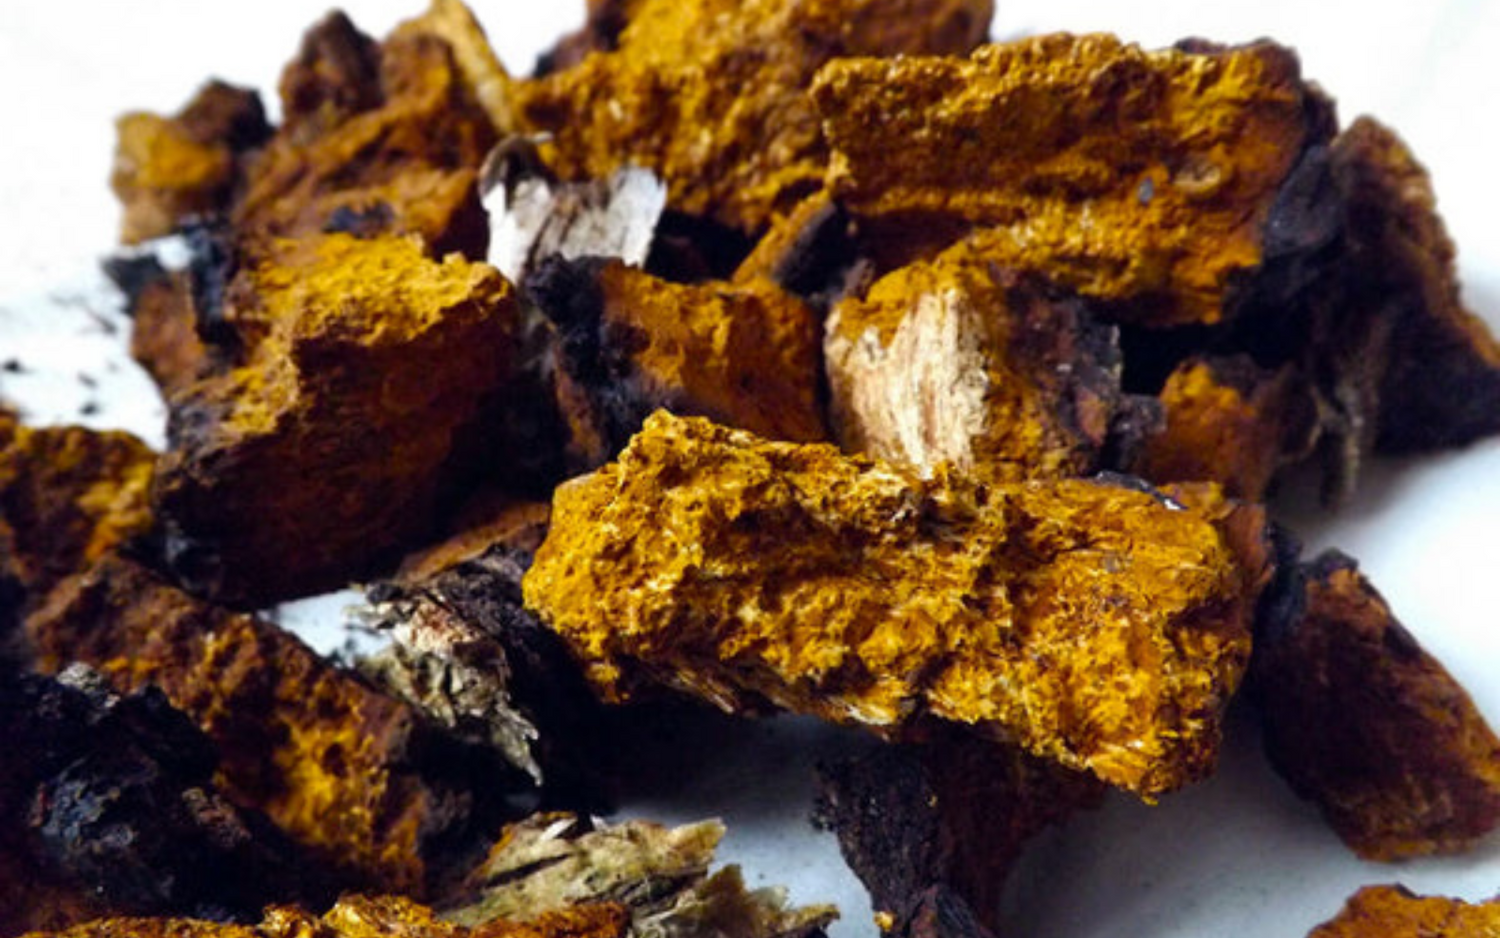 How Chaga can help you to stay Healthy